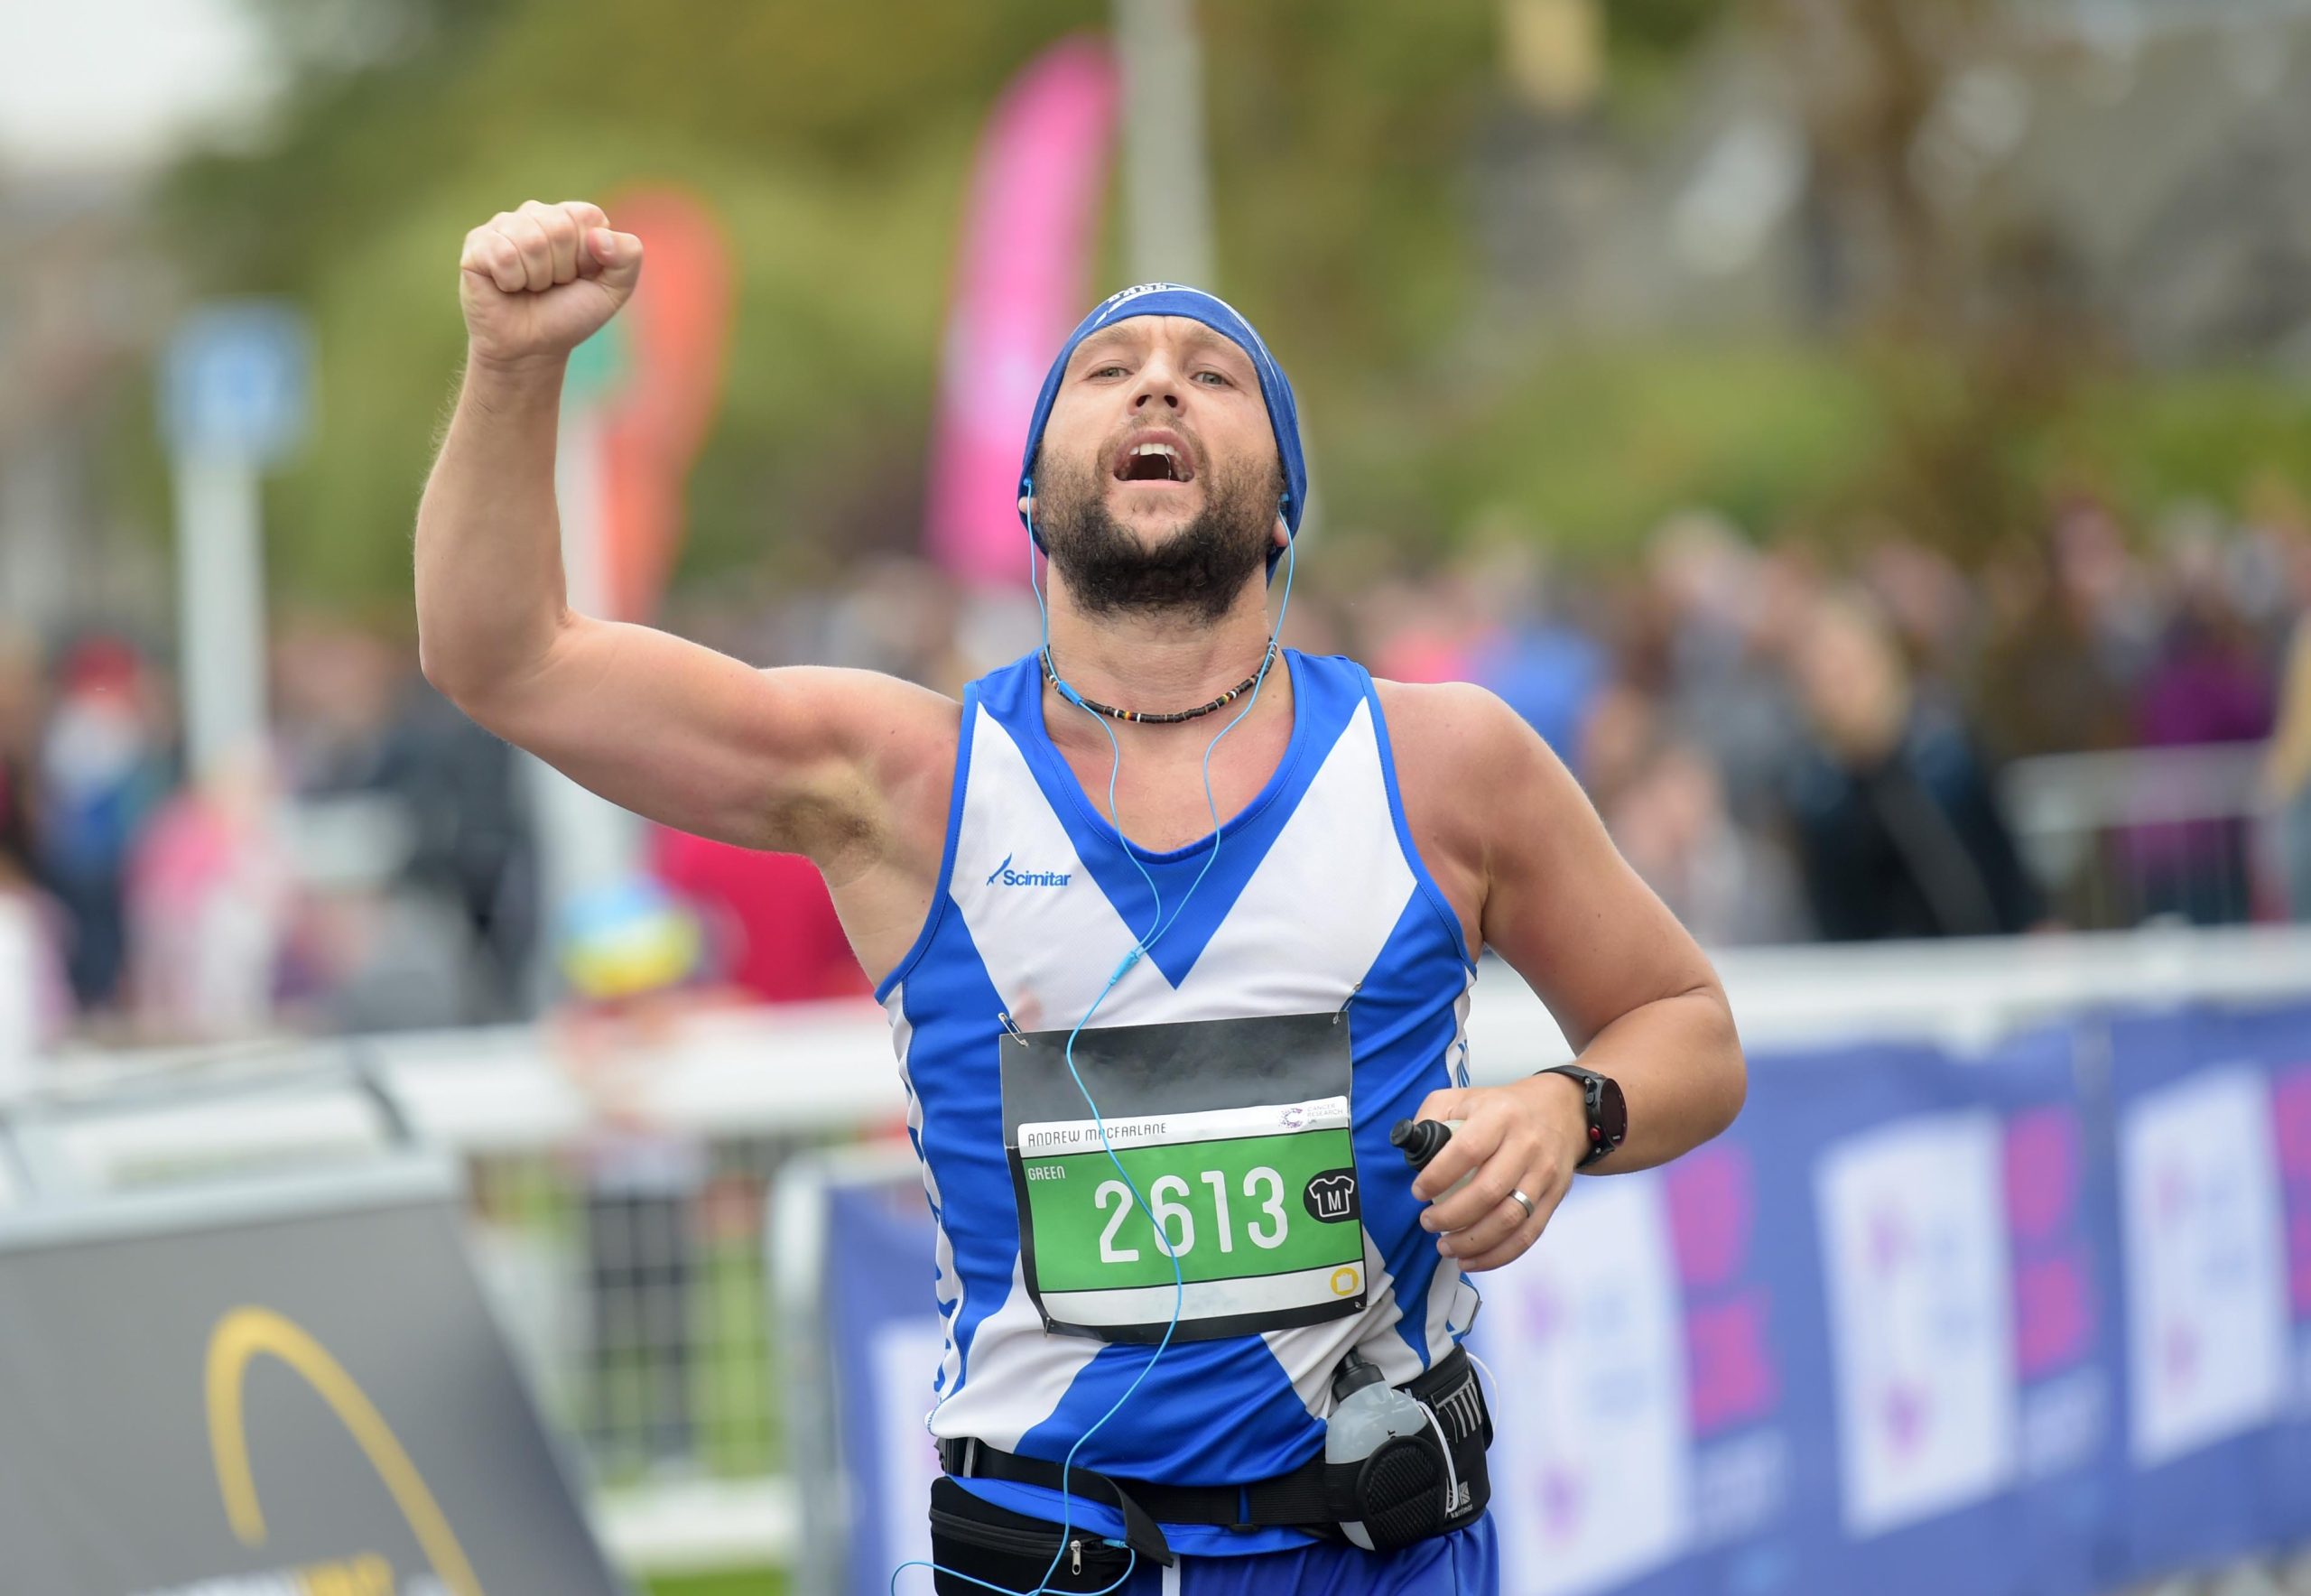 Man raising his fist in celebration during a running event.